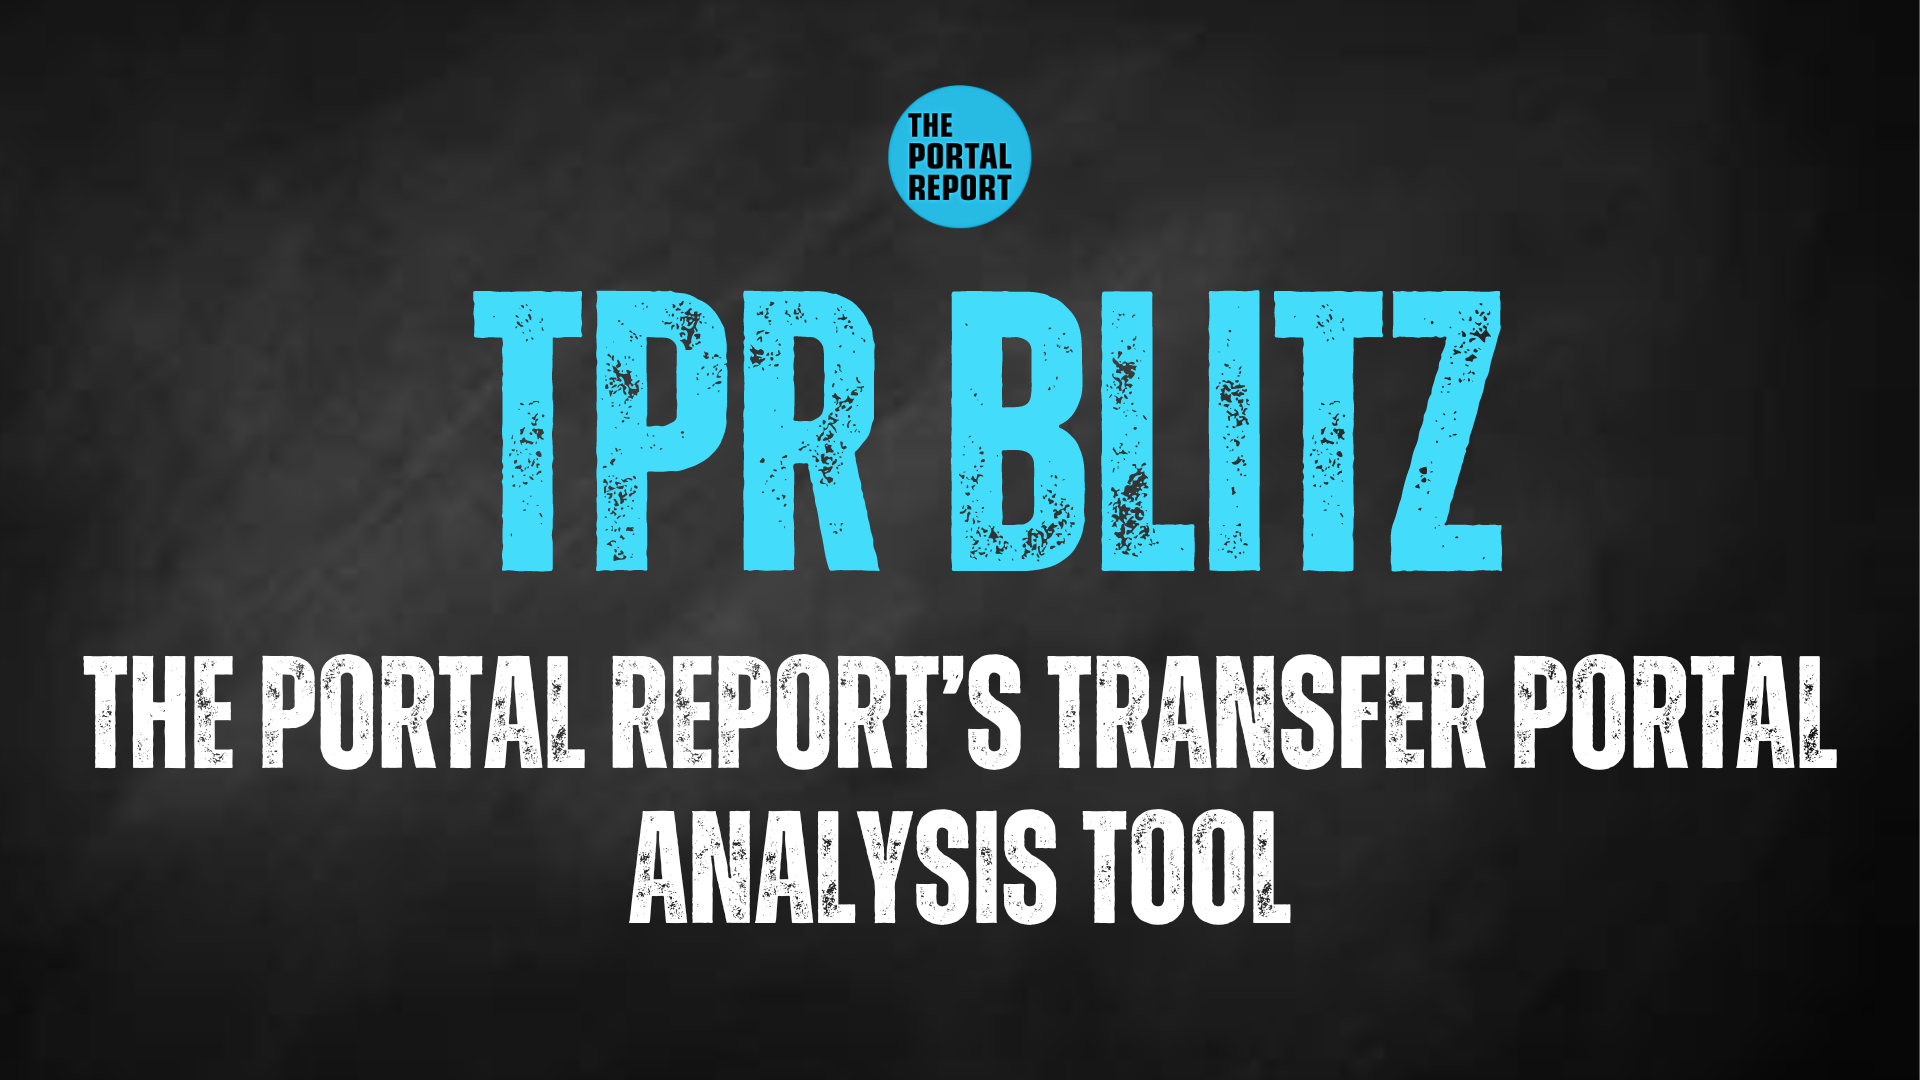 THE PORTAL REPORT - BLITZ is a transfer portal analysis tool used by college football fans, media members, coaches, and players to sift through transfers of the past three years in college football.